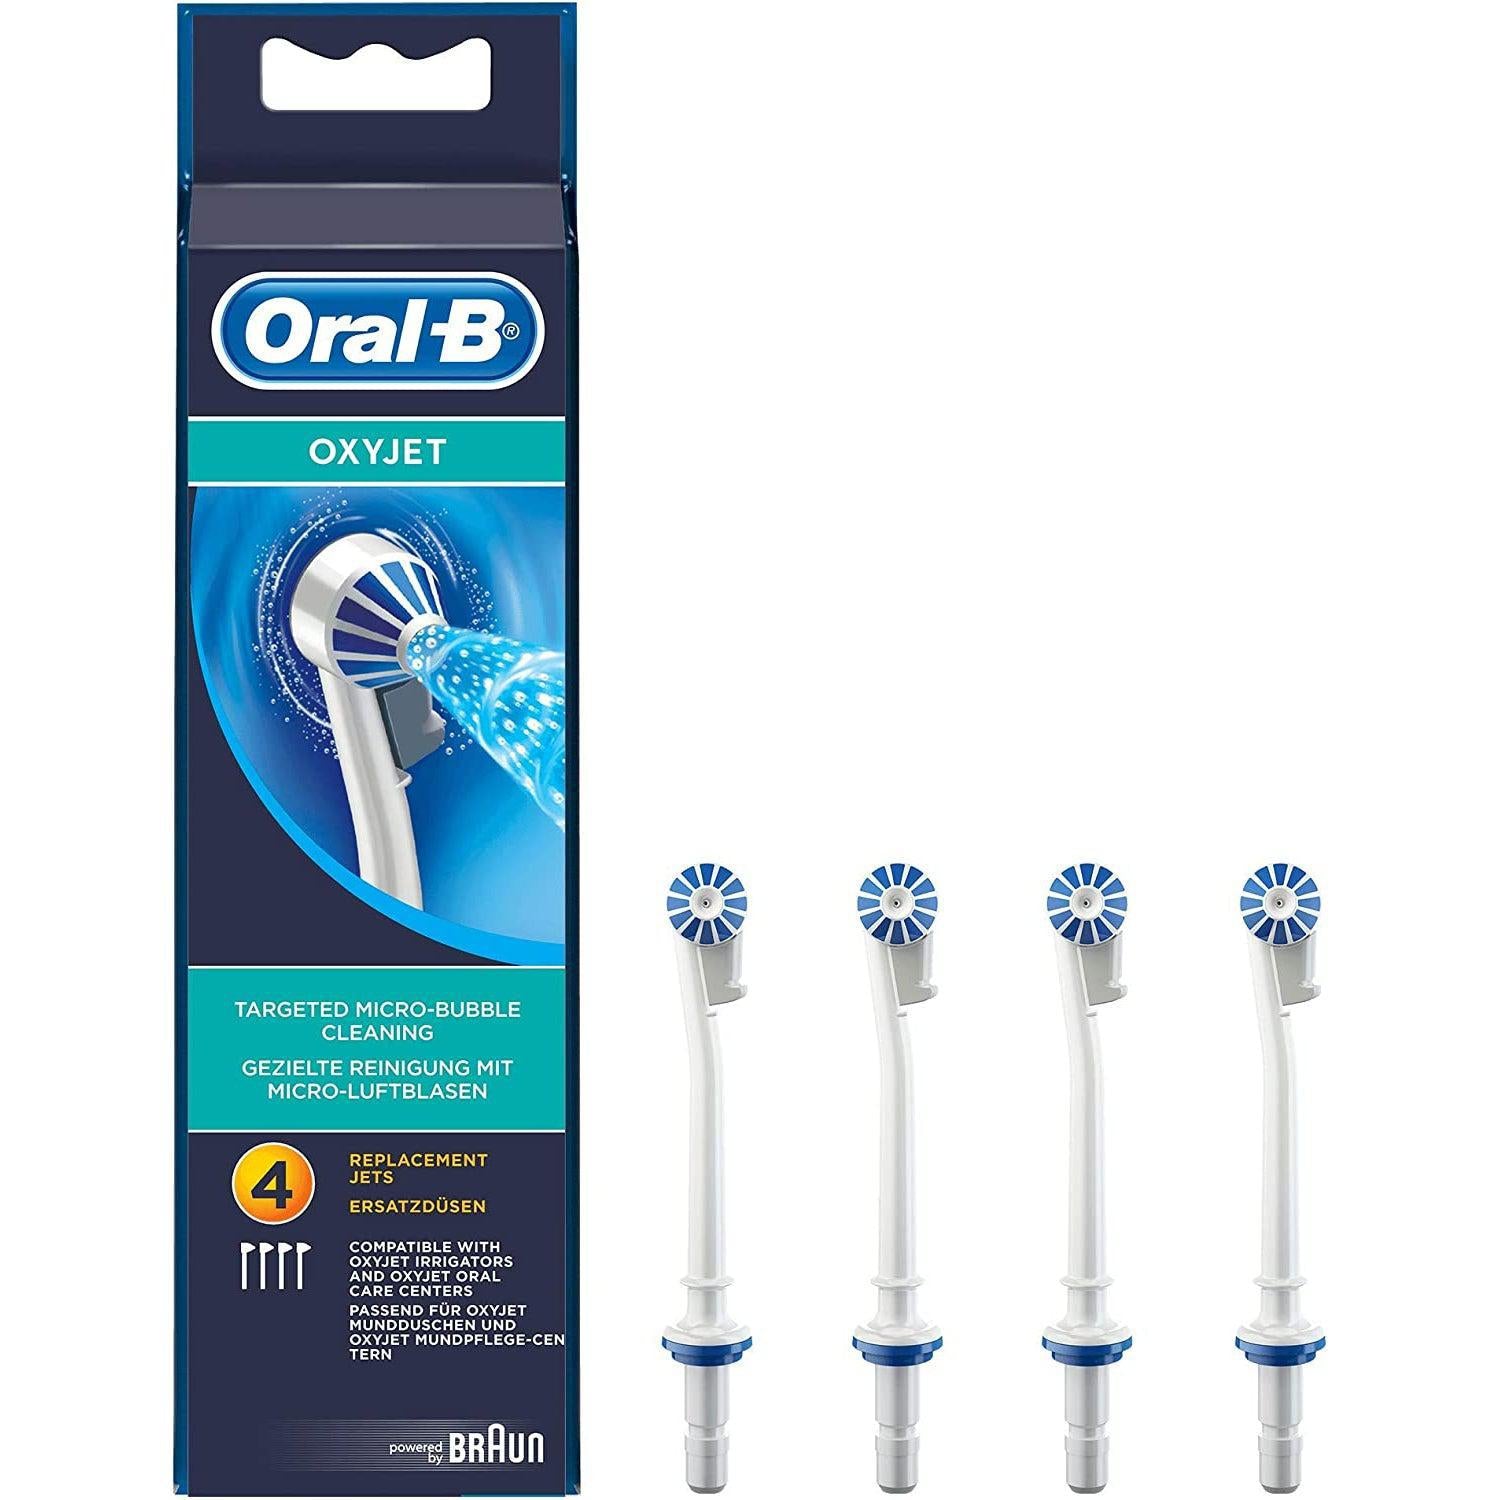 Oral-B Professional OxyJet Electric Toothbrush Heads - Pack of 4 - Healthxpress.ie